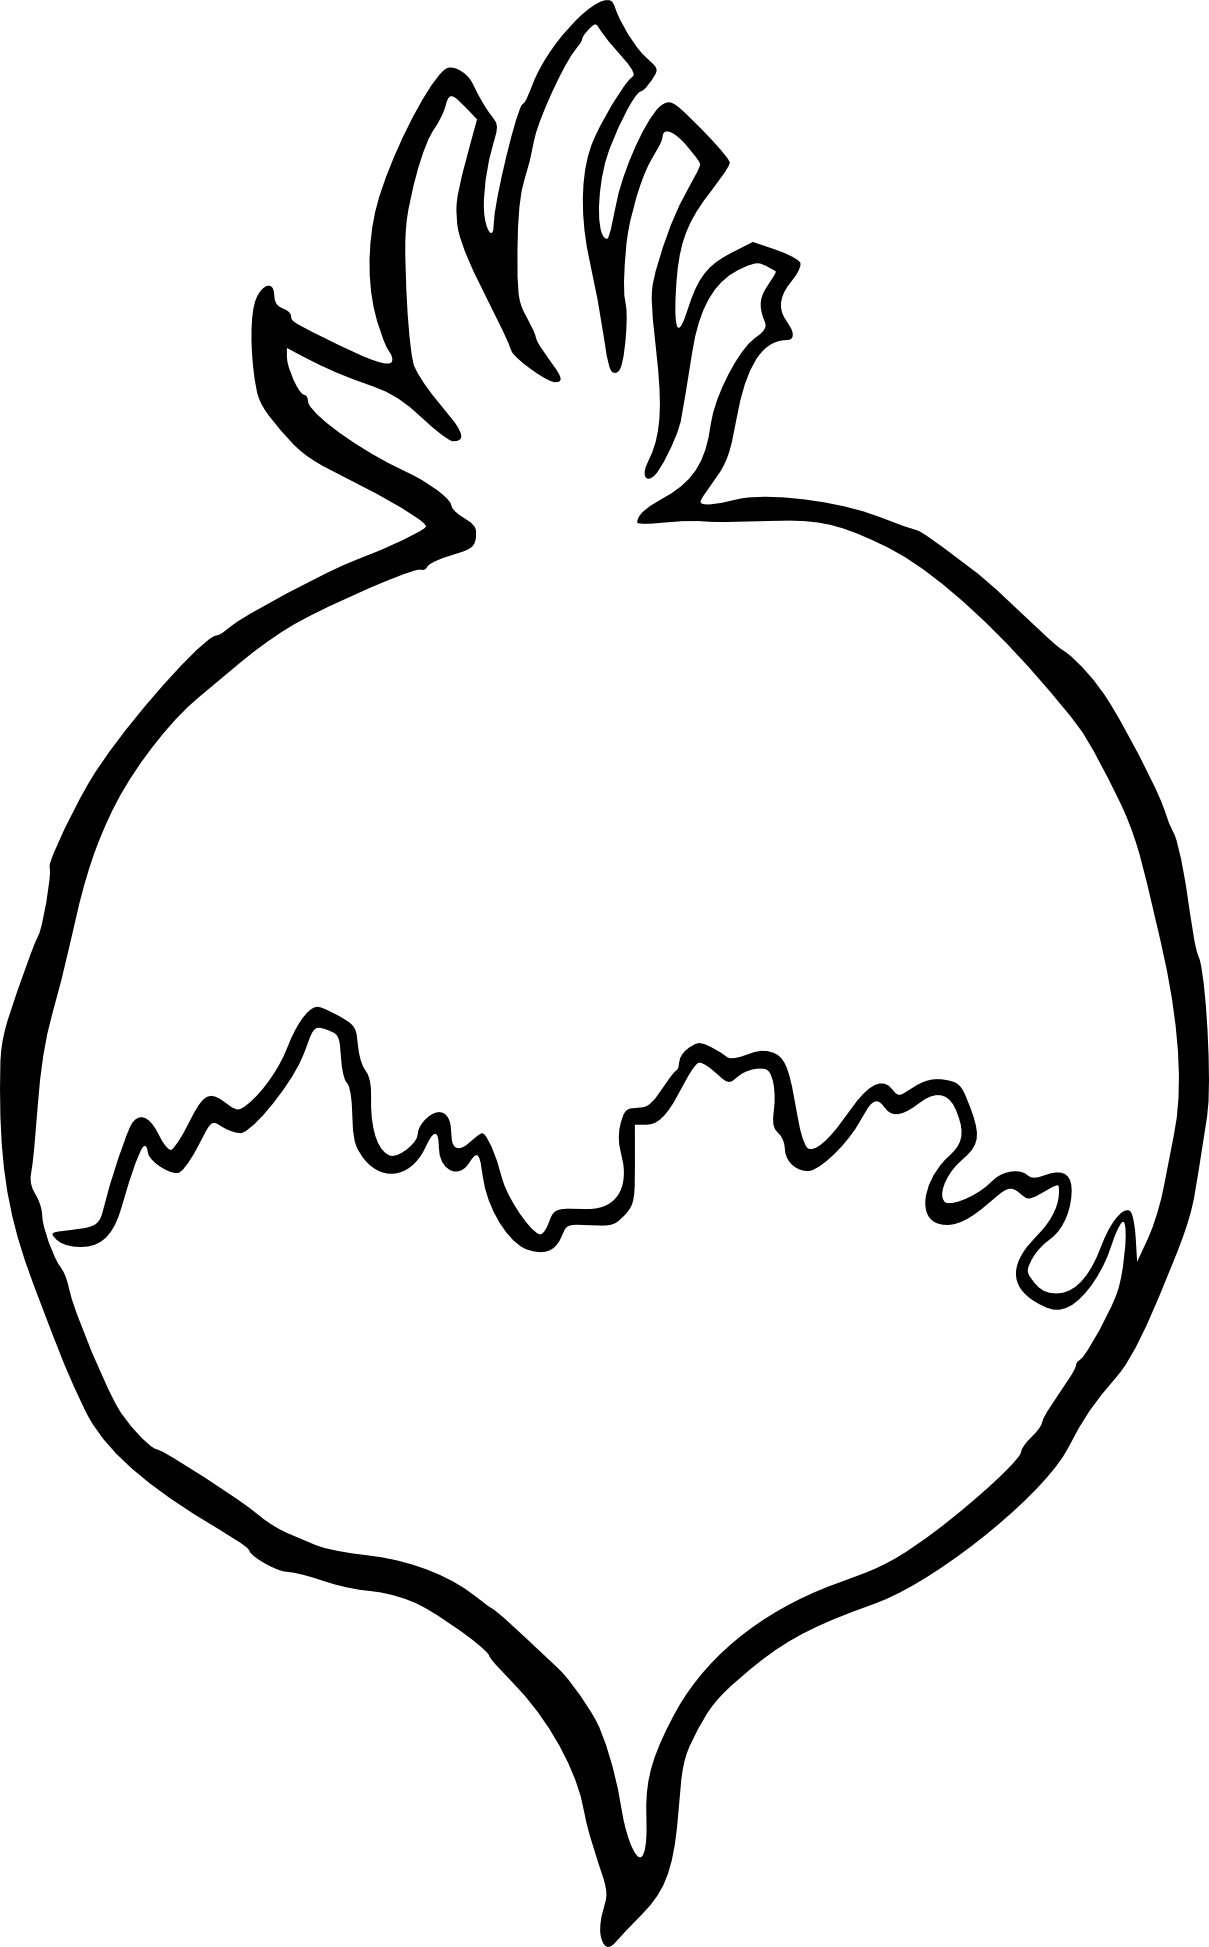 Beet drawing and coloring page